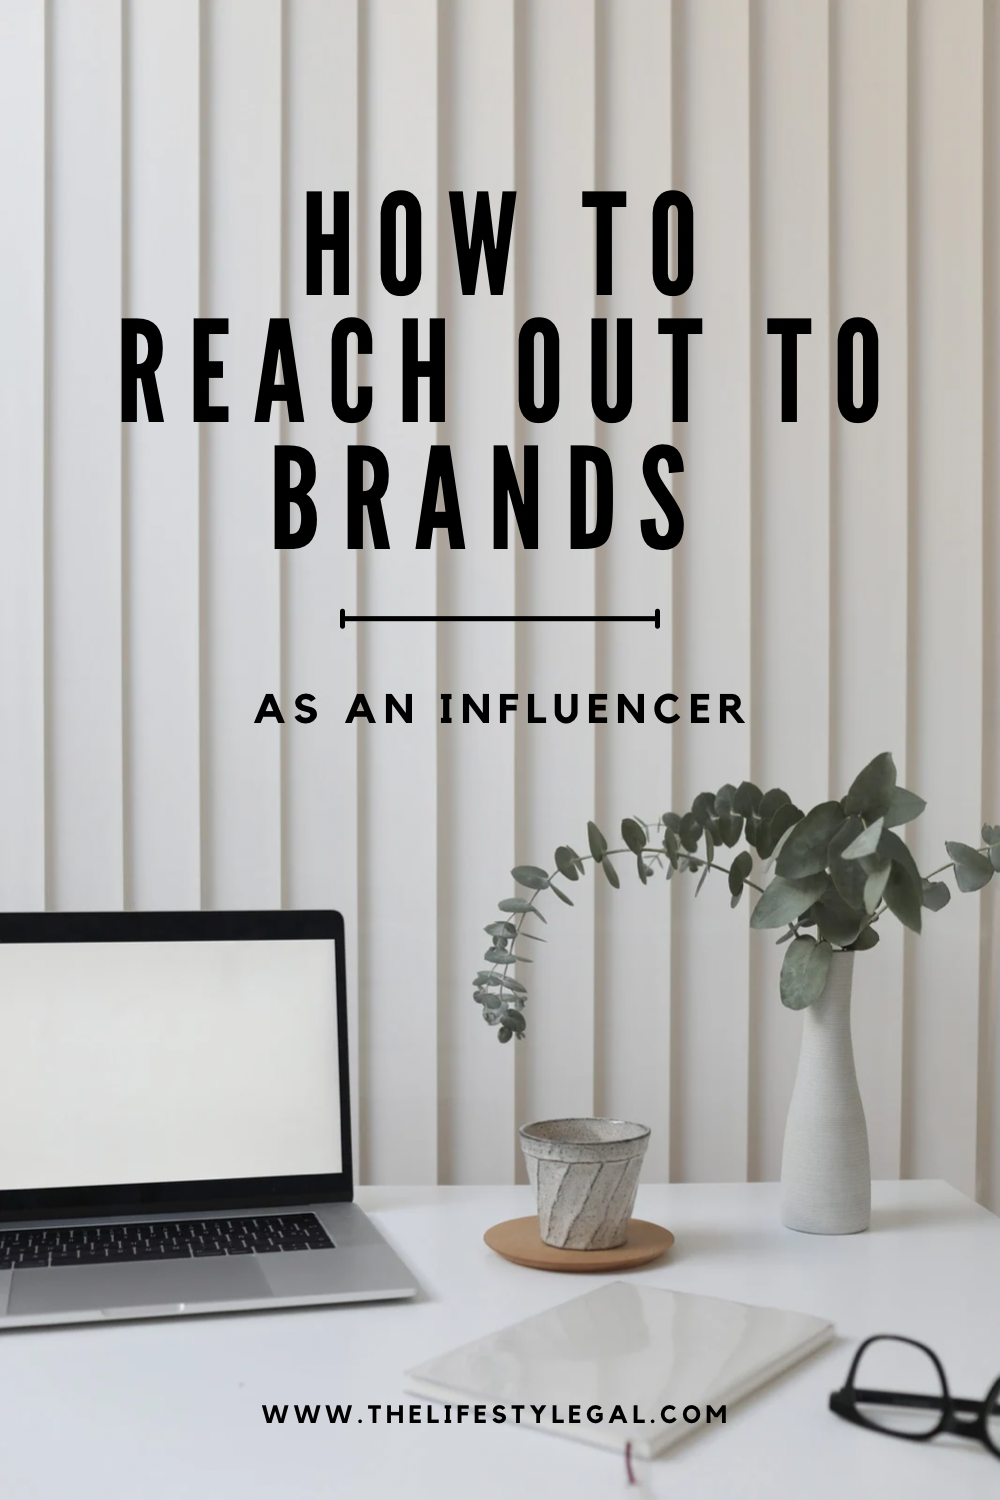 How to reach out to brands